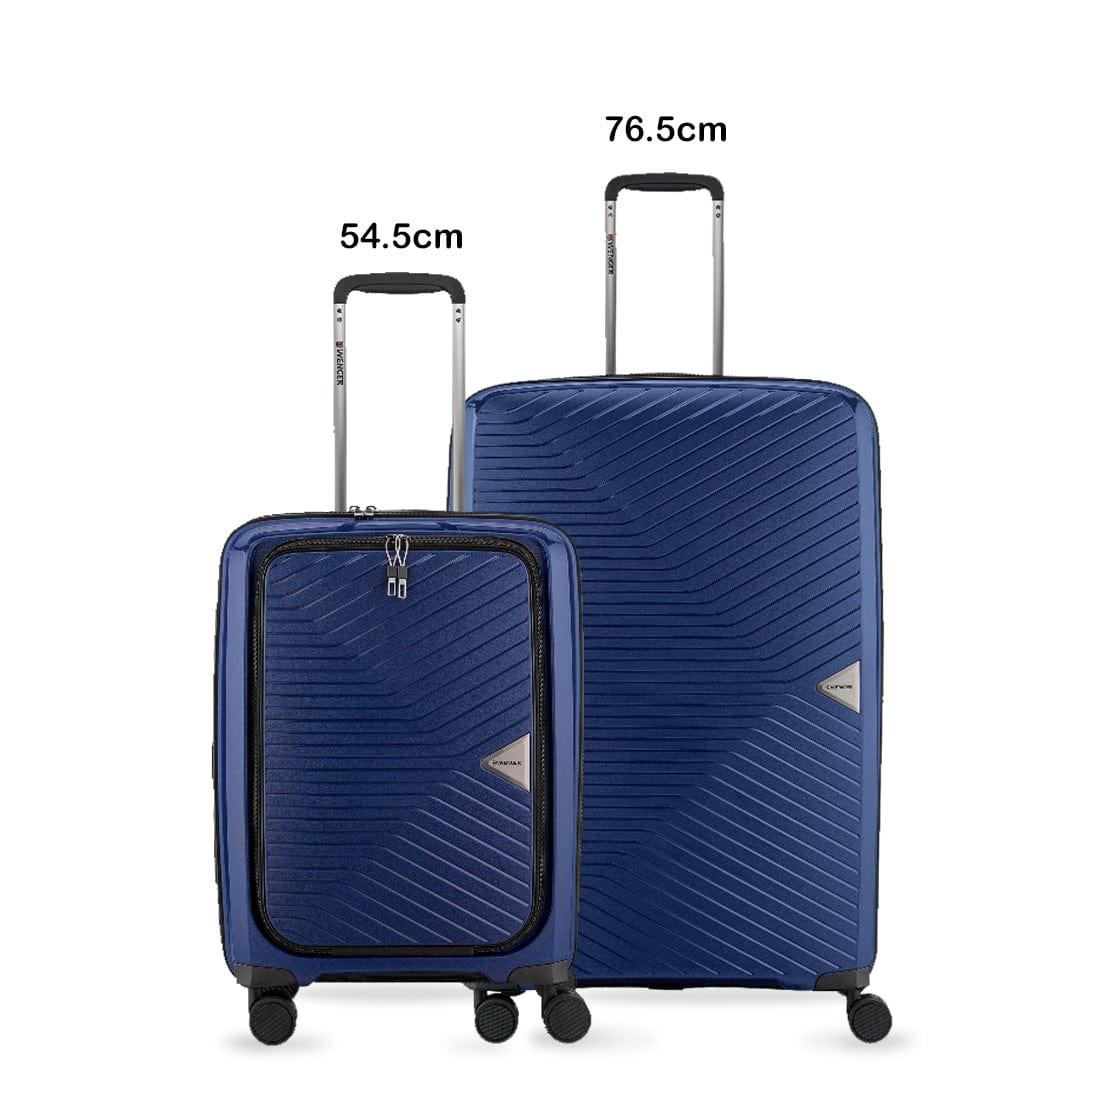 Wenger Ultra-Lite 2 Piece 55+77cm Hardside Expandable Cabin & Check-In Luggage Trolley Set Blue